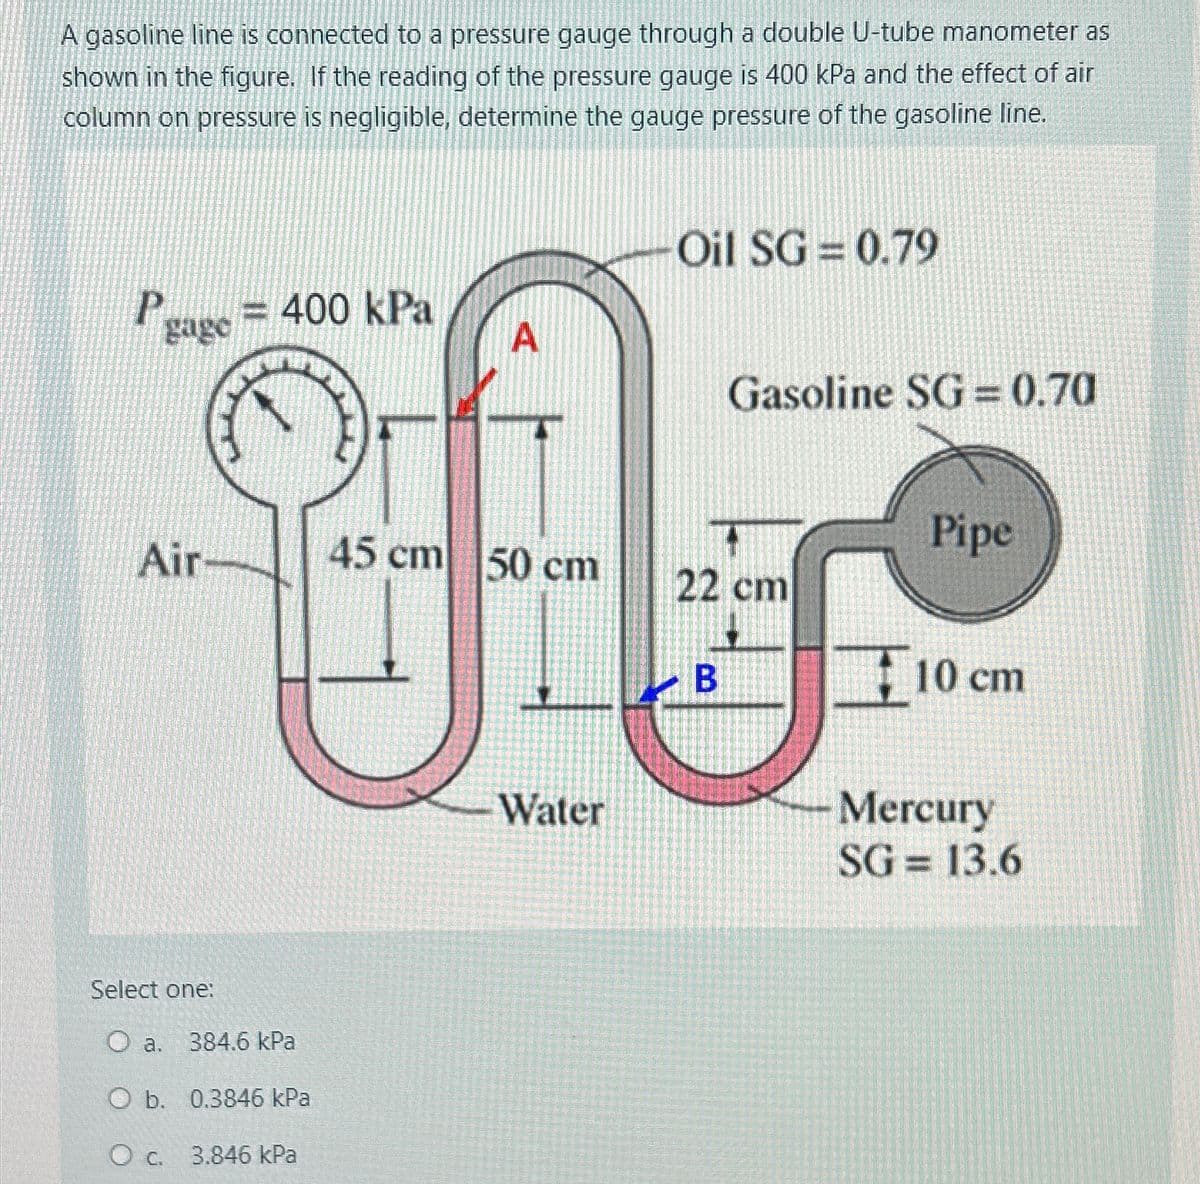 A gasoline line is connected to a pressure gauge through a double U-tube manometer as
shown in the figure. If the reading of the pressure gauge is 400 kPa and the effect of air
column on pressure is negligible, determine the gauge pressure of the gasoline line.
Oil SG= 0.79
P
gage = 400 kPa
A
Gasoline SG= 0.70
Pipe
Air
45 cm 50 cm
22 cm
B
10 cm
Water
Mercury
Select one:
O a. 384.6 kPa
O b. 0.3846 kPa
O c. 3.846 kPa
SG= 13.6